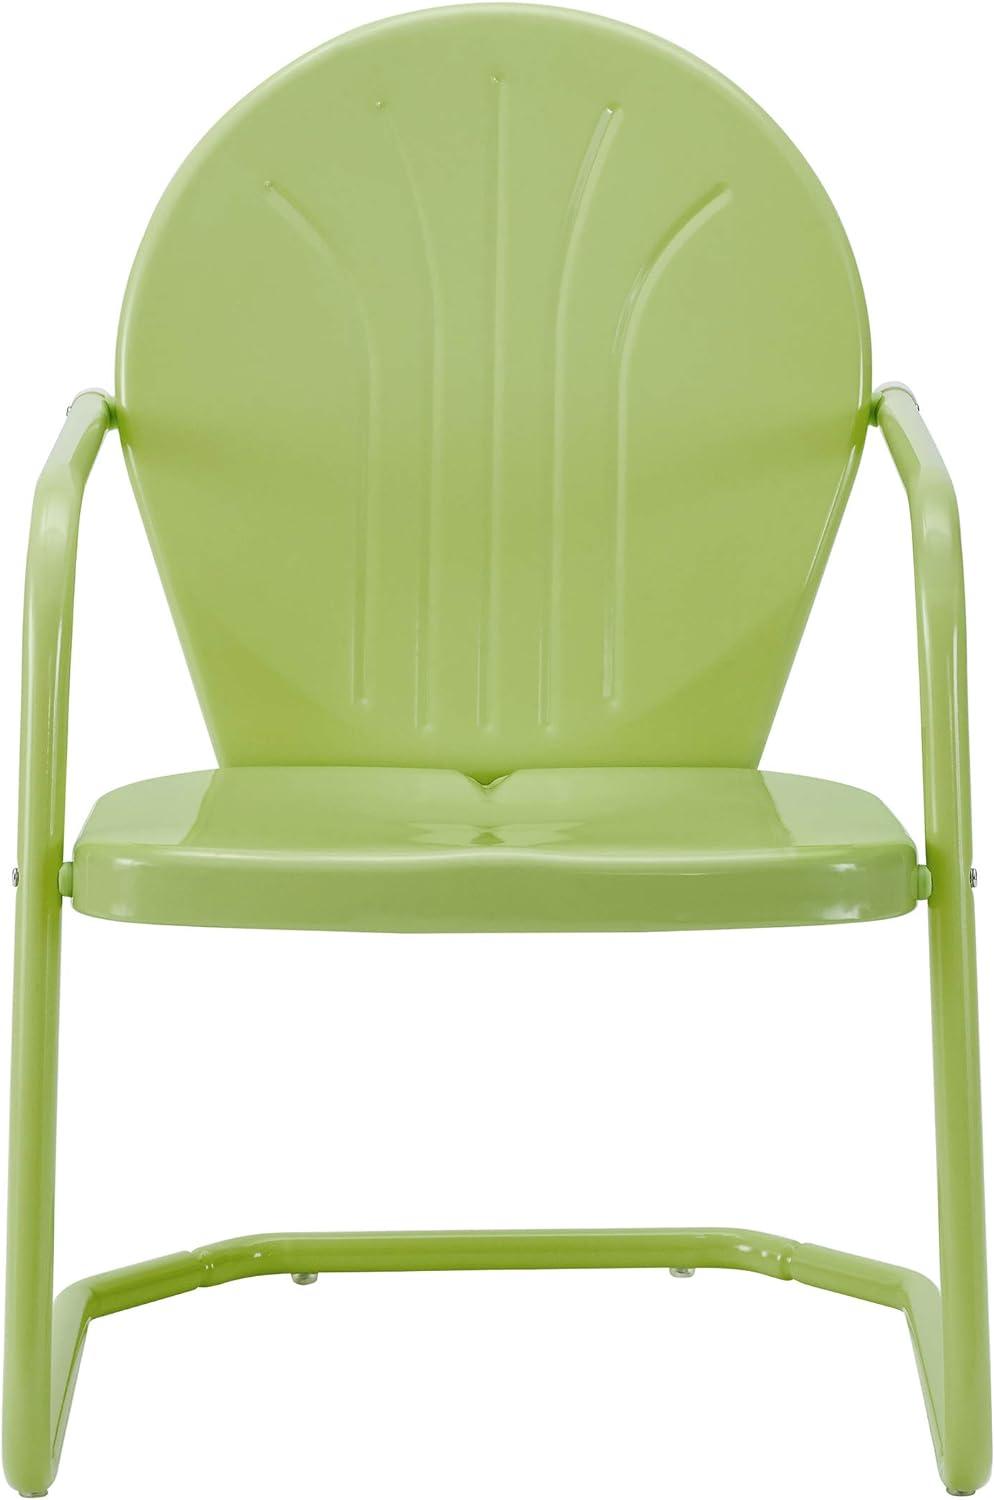 Key Lime Retro Metal Outdoor Lounge Chair